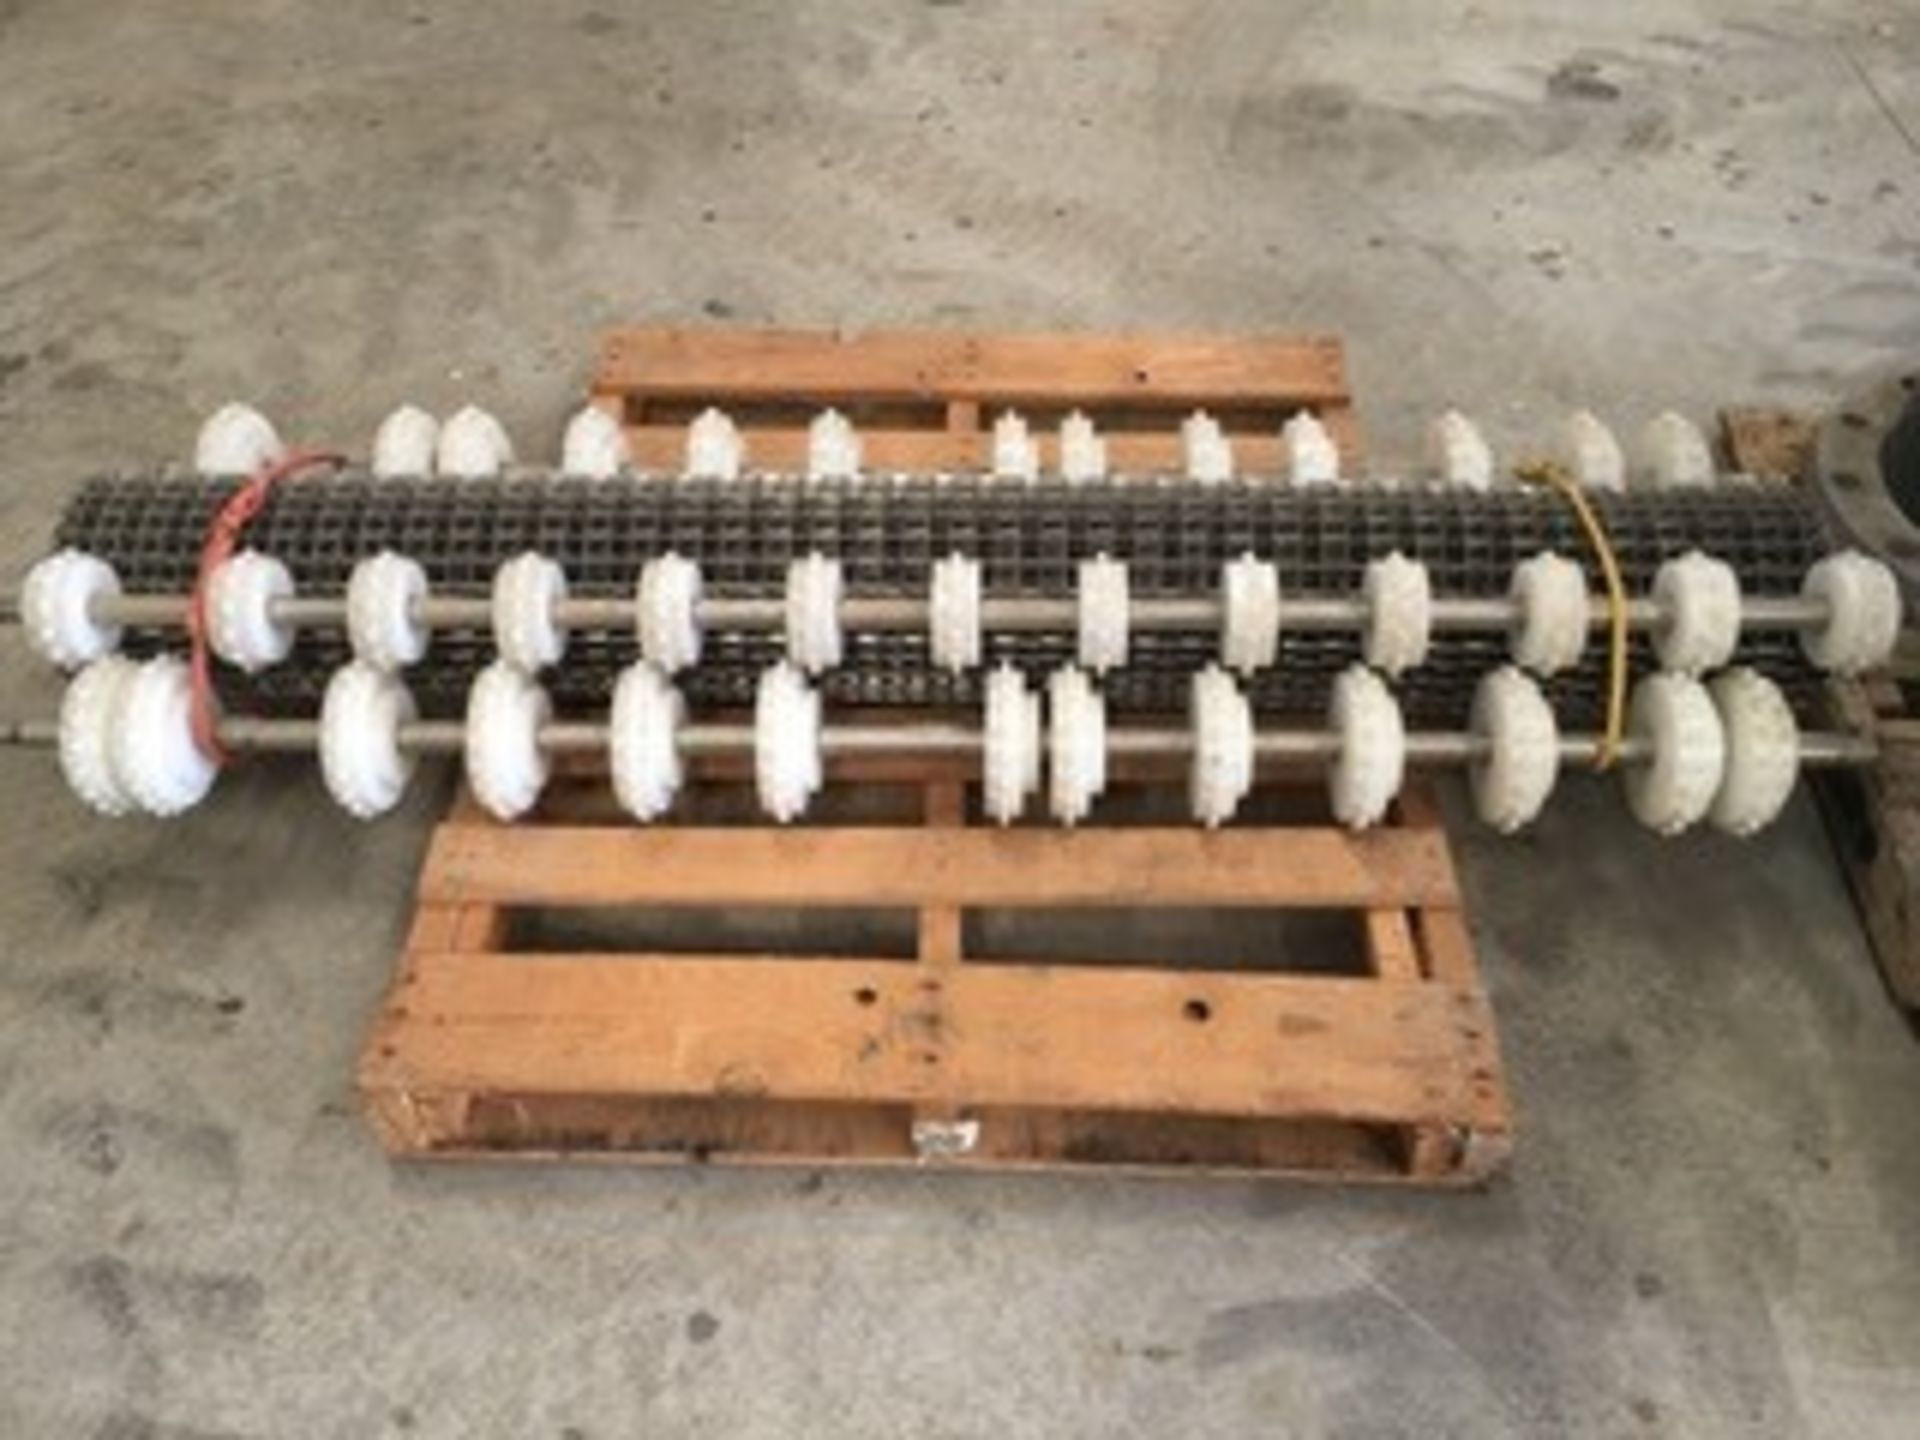 S/S Mesh Conveyor Belt, Aprox. 12' L x 6' W, with Various (3) S/S Shafts, with UHMW Gears to Match - Image 2 of 3